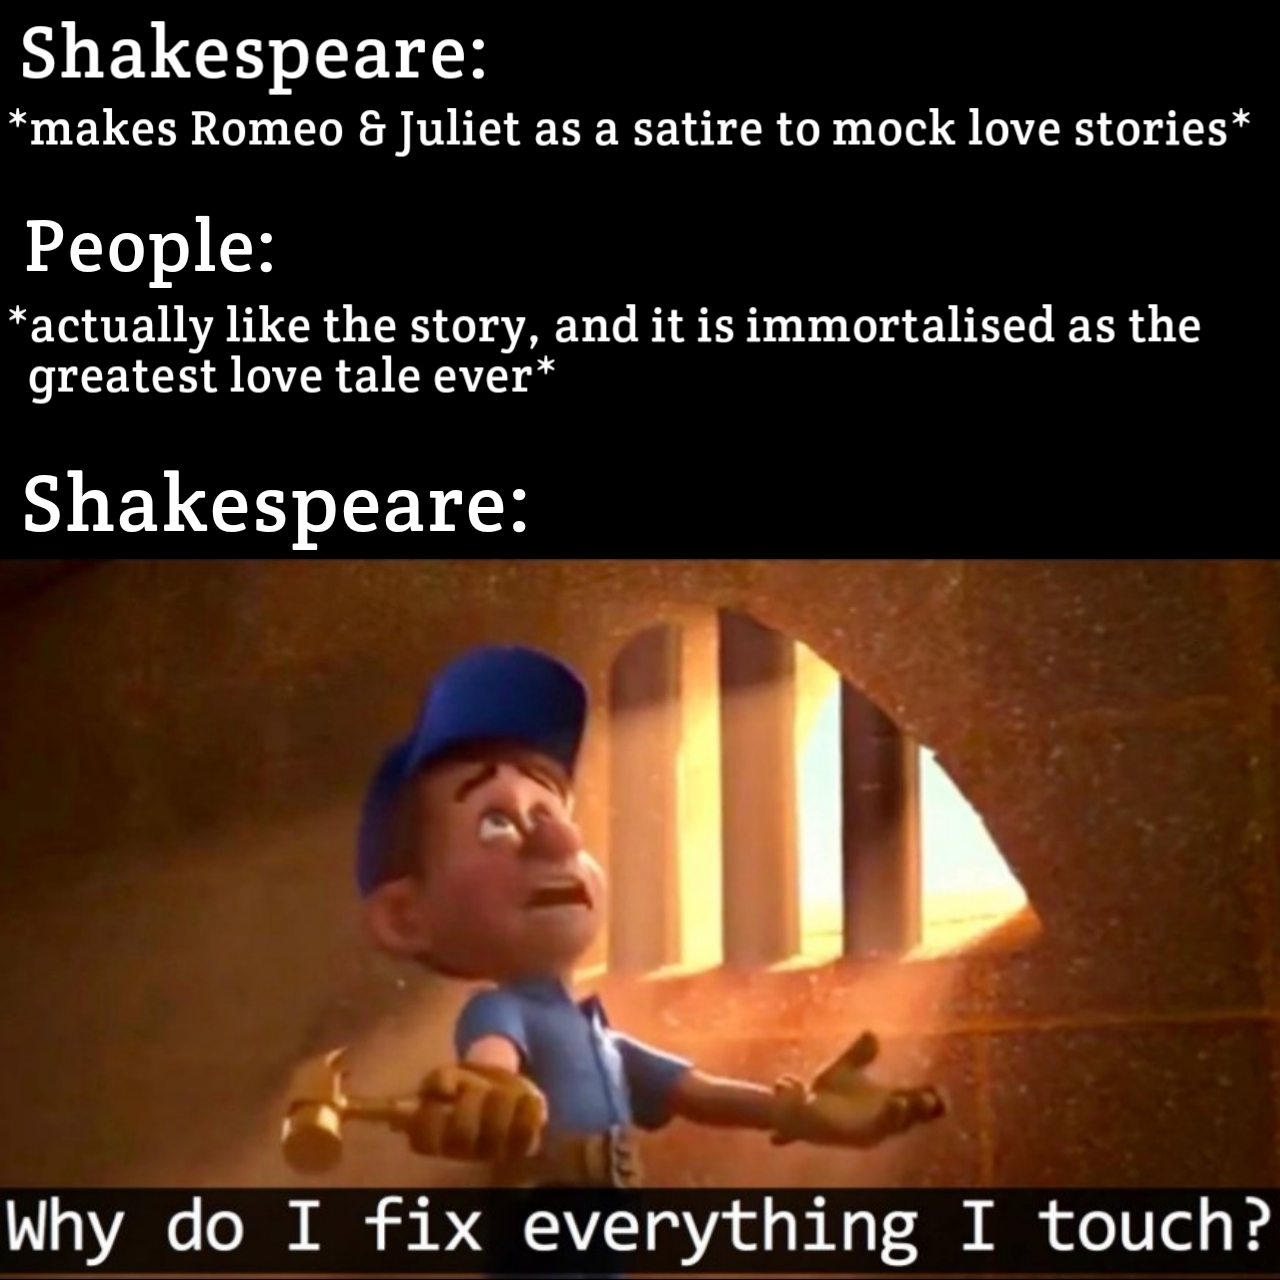 funny memes - dank memes - photo caption - Shakespeare makes Romeo & Juliet as a satire to mock love stories People actually the story, and it is immortalised as the greatest love tale ever Shakespeare Why do I fix everything I touch?